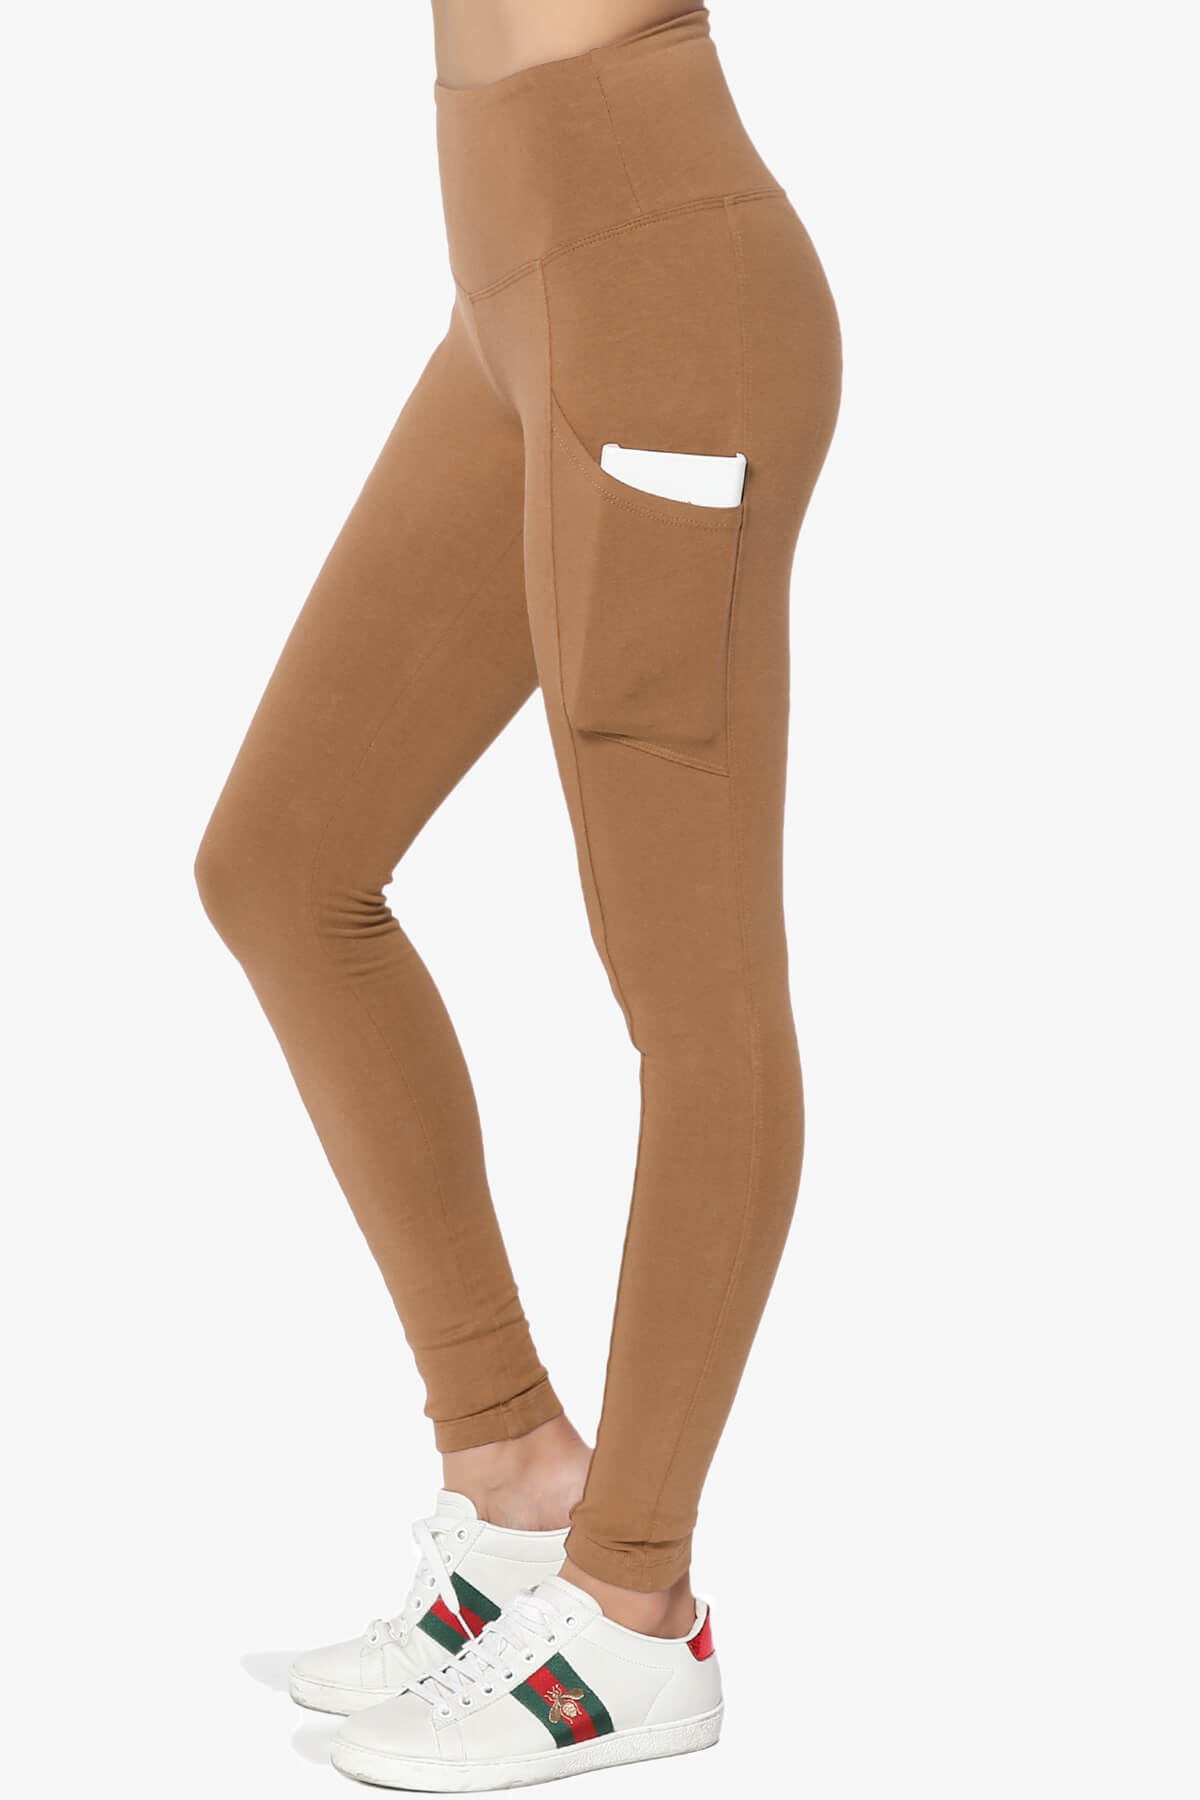 Load image into Gallery viewer, Ansley Luxe Cotton Leggings with Pockets DEEP CAMEL_1
